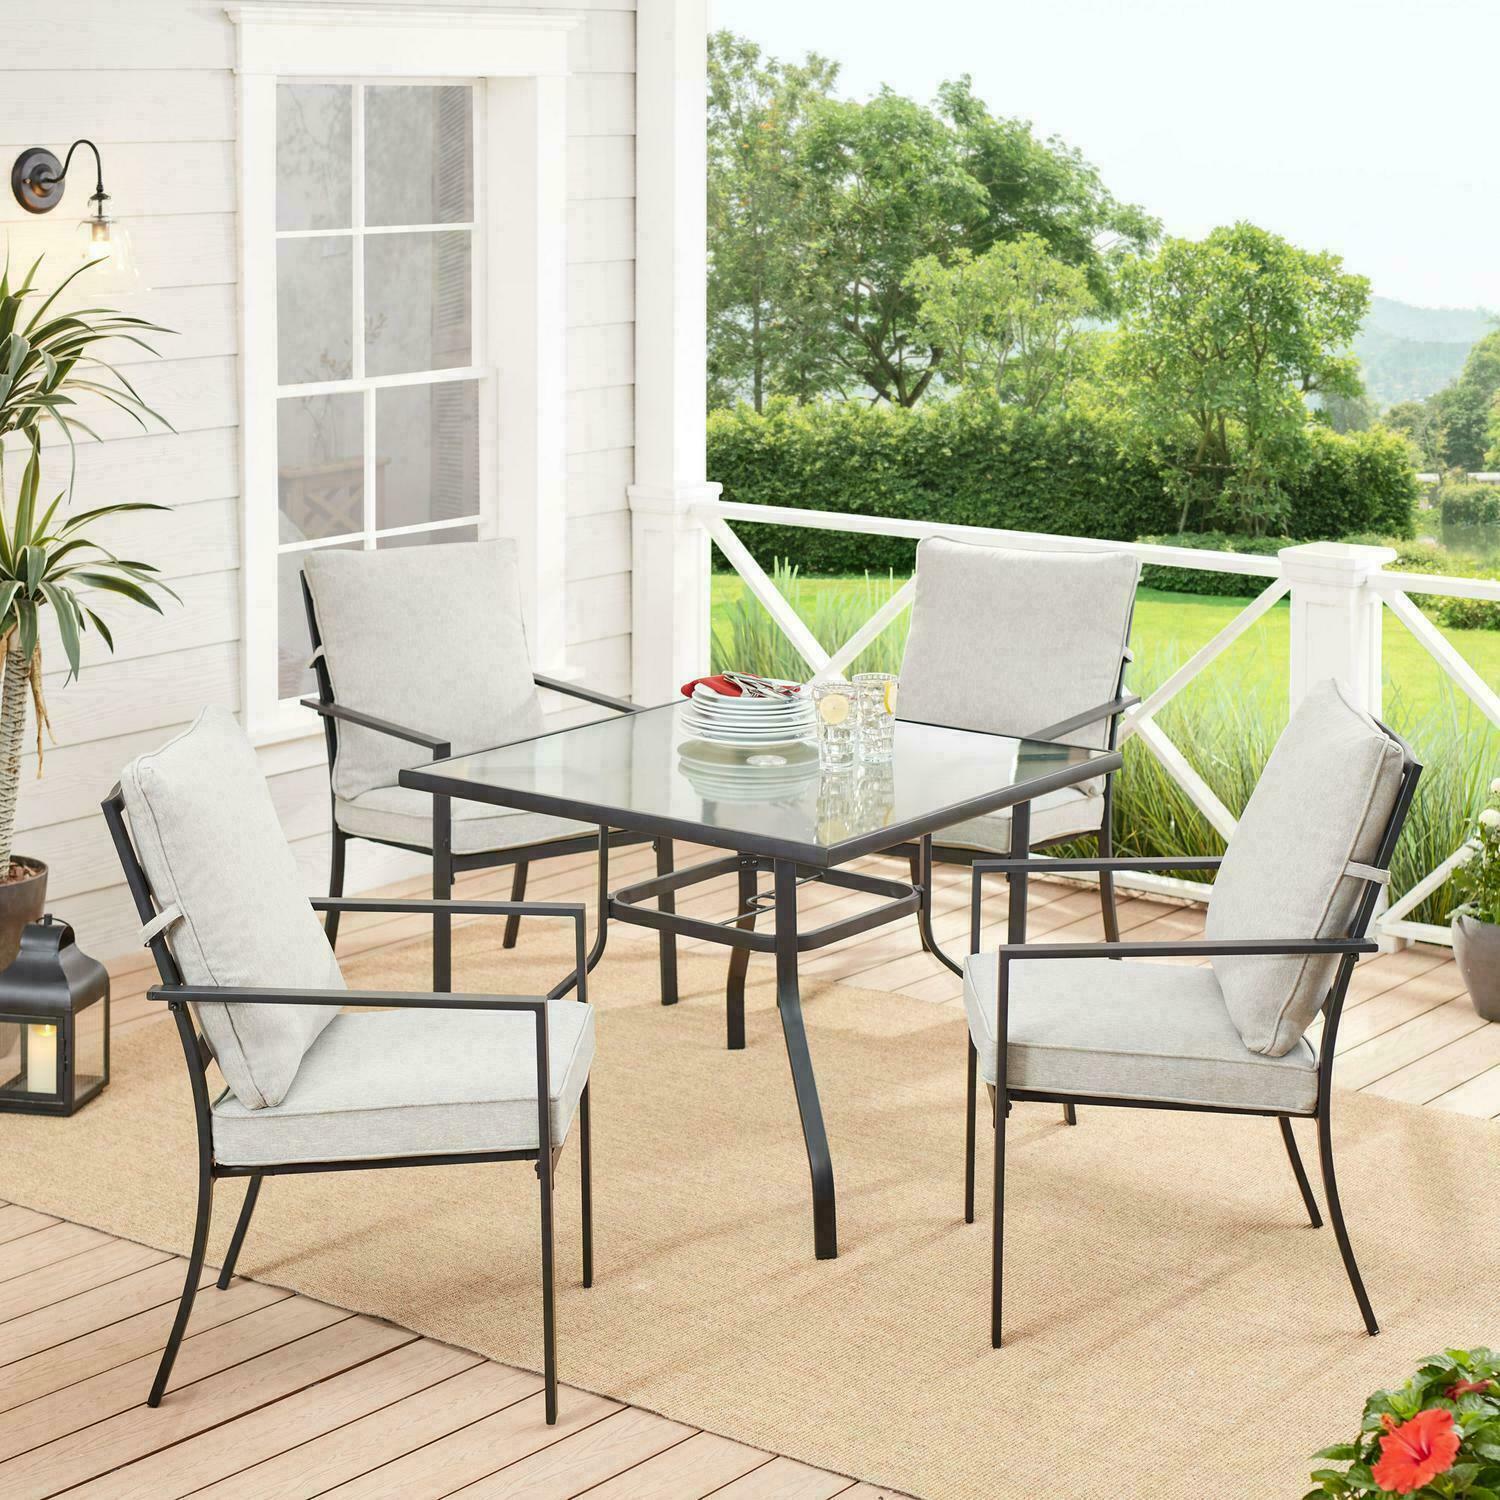 Outdoor Patio Dining Set 5-Pc 4 Soft Cushion Chair Glass Table Garden Furniture